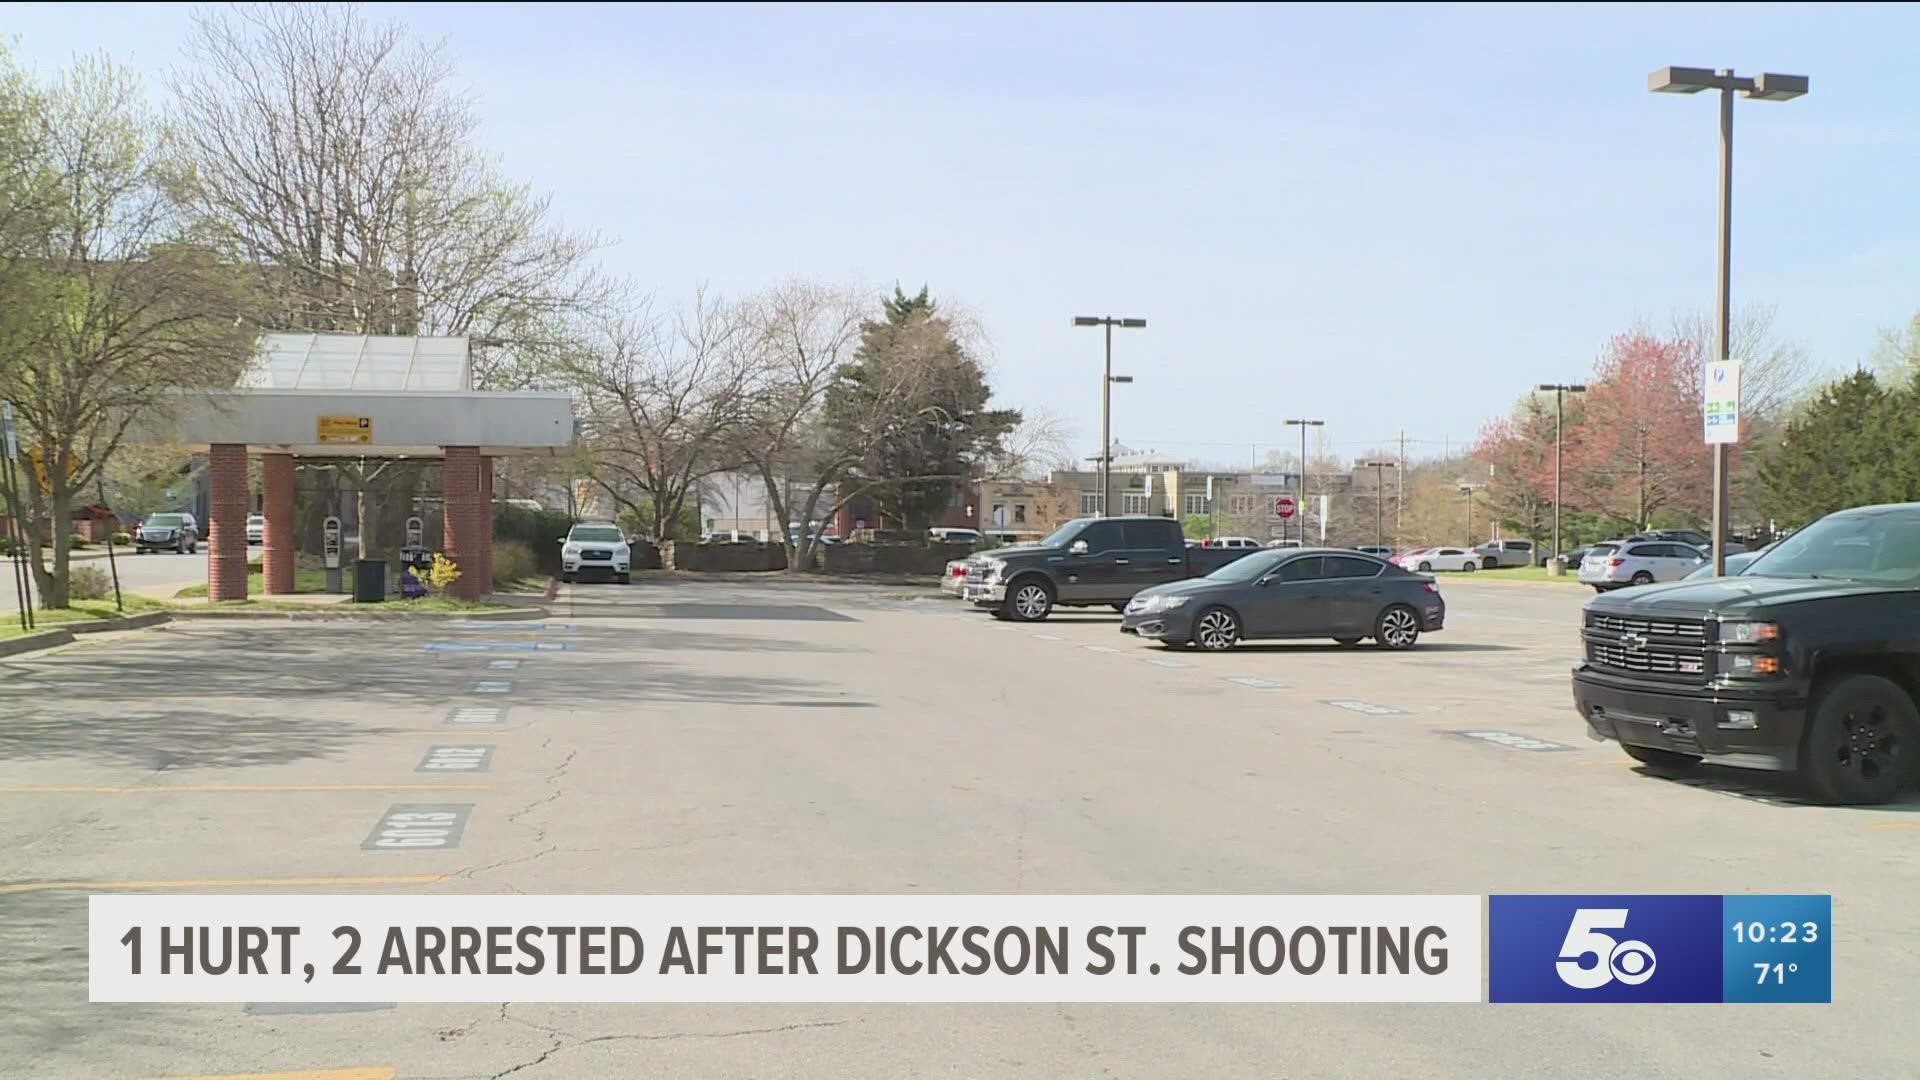 The shooting took place at the Walton Arts Center parking lot on West Dickson St. at around 2:14 a.m. Sunday, April 10.